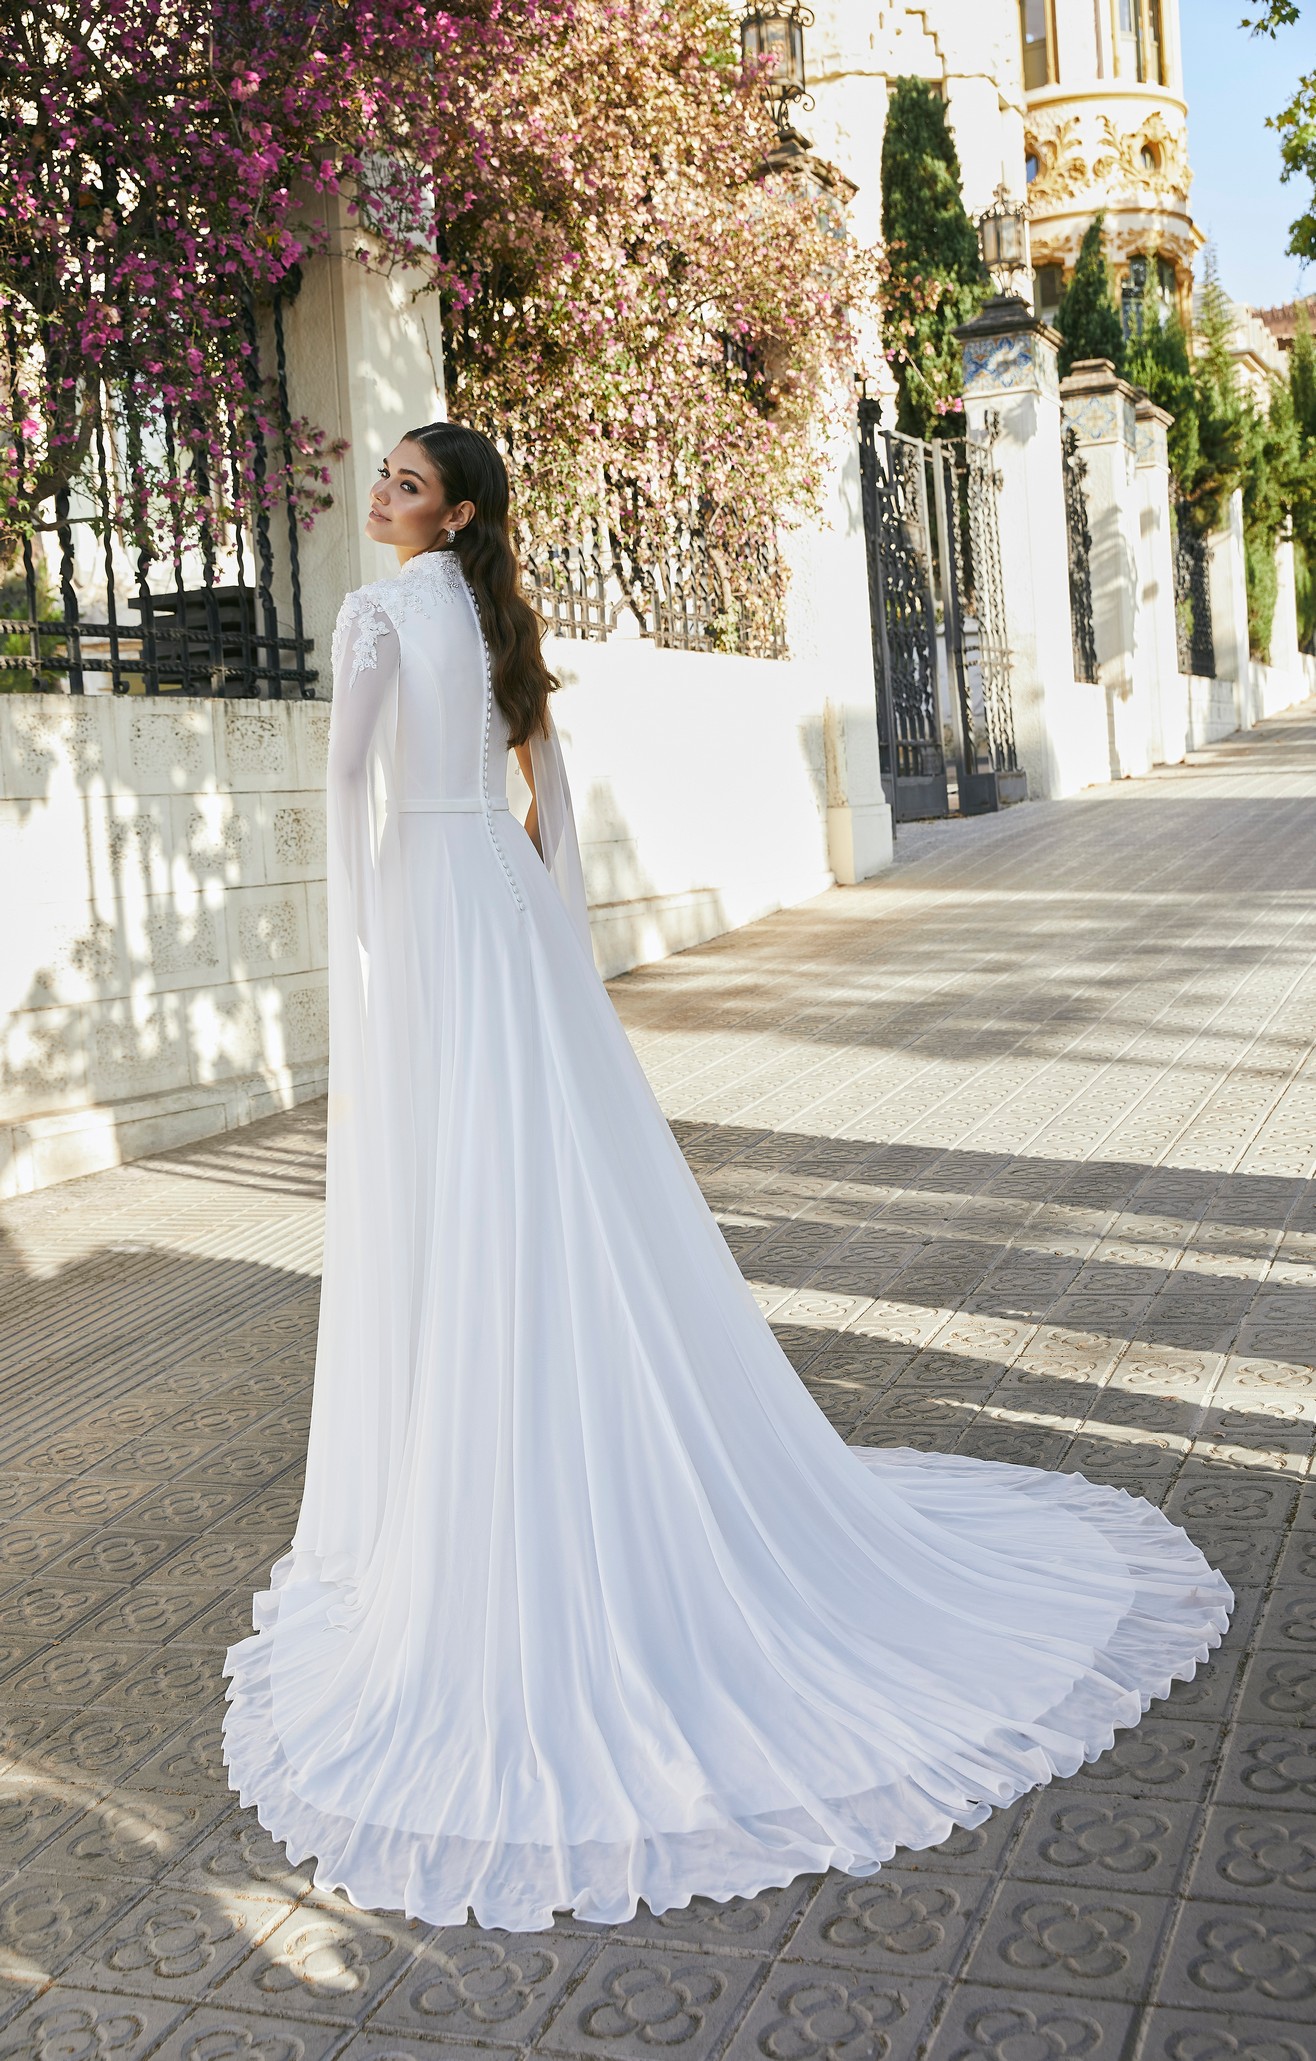 a plain A-line wedding dress with a sweetheart neckline, beaded Queen Anne collar and attached chiffon cape.